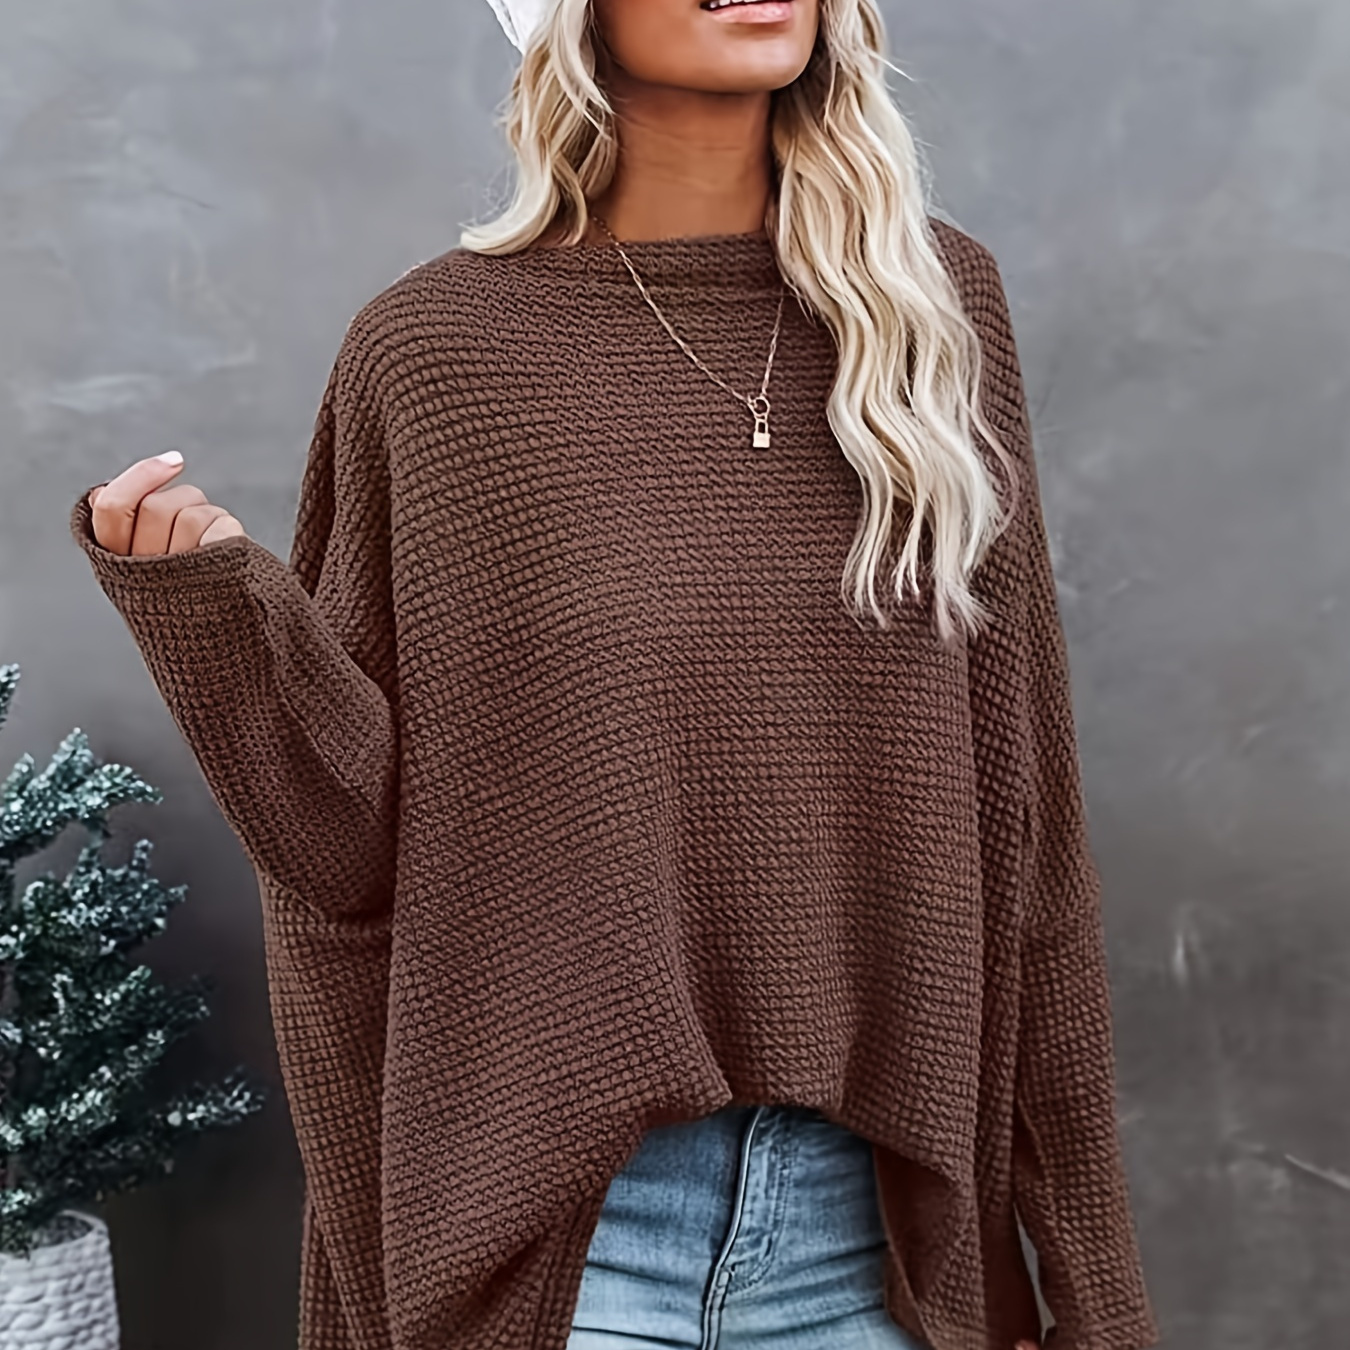 

Women's Casual Off Shoulder Bat Long Sleeve Waffle Knitted Oversized Pullover Sweater, Casual Tops For Fall & Winter, Women's Clothing